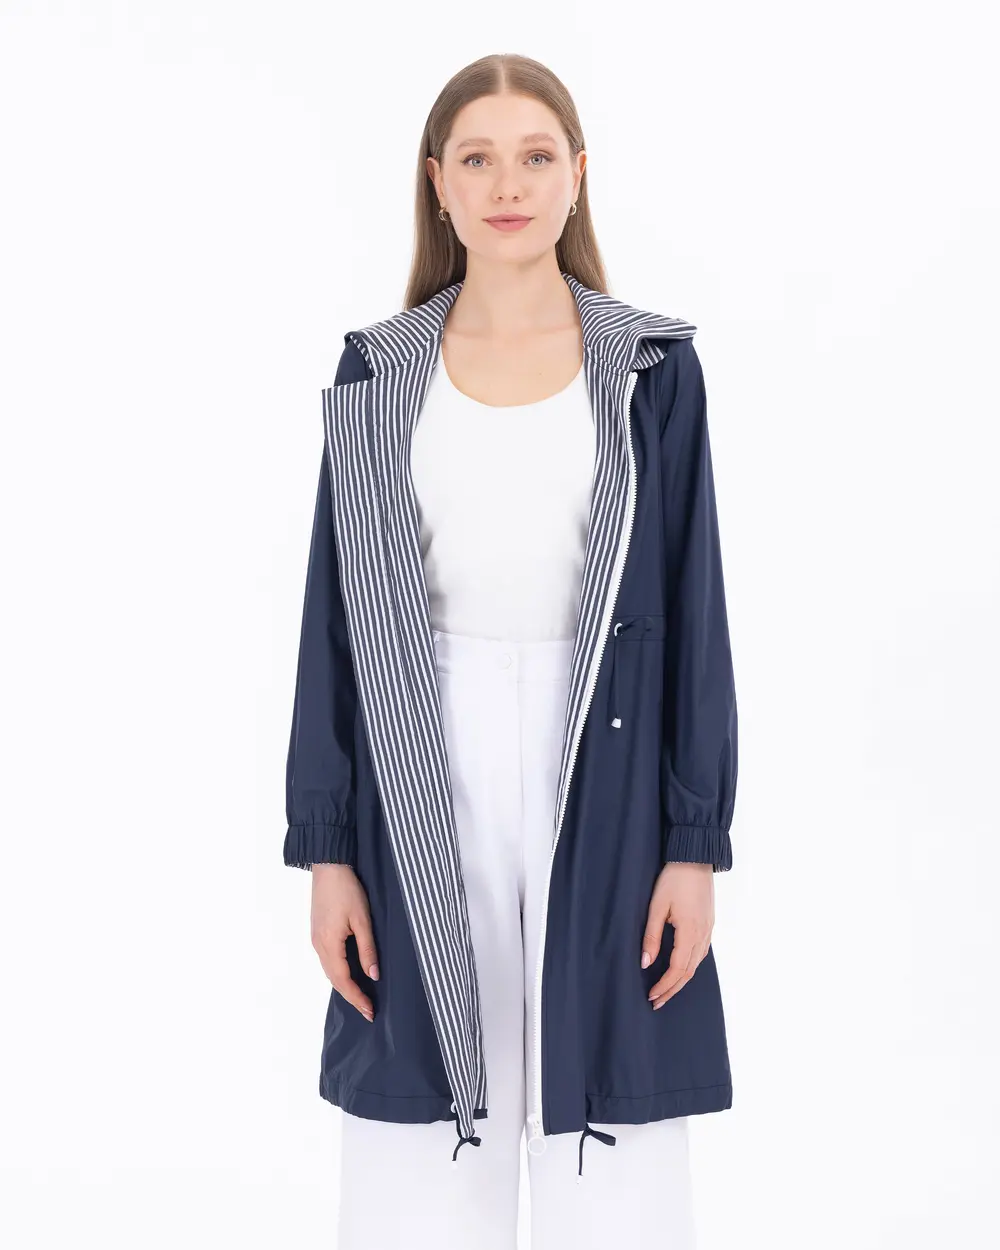 Hooded Collar Lined Patterned Sports Trench Coat